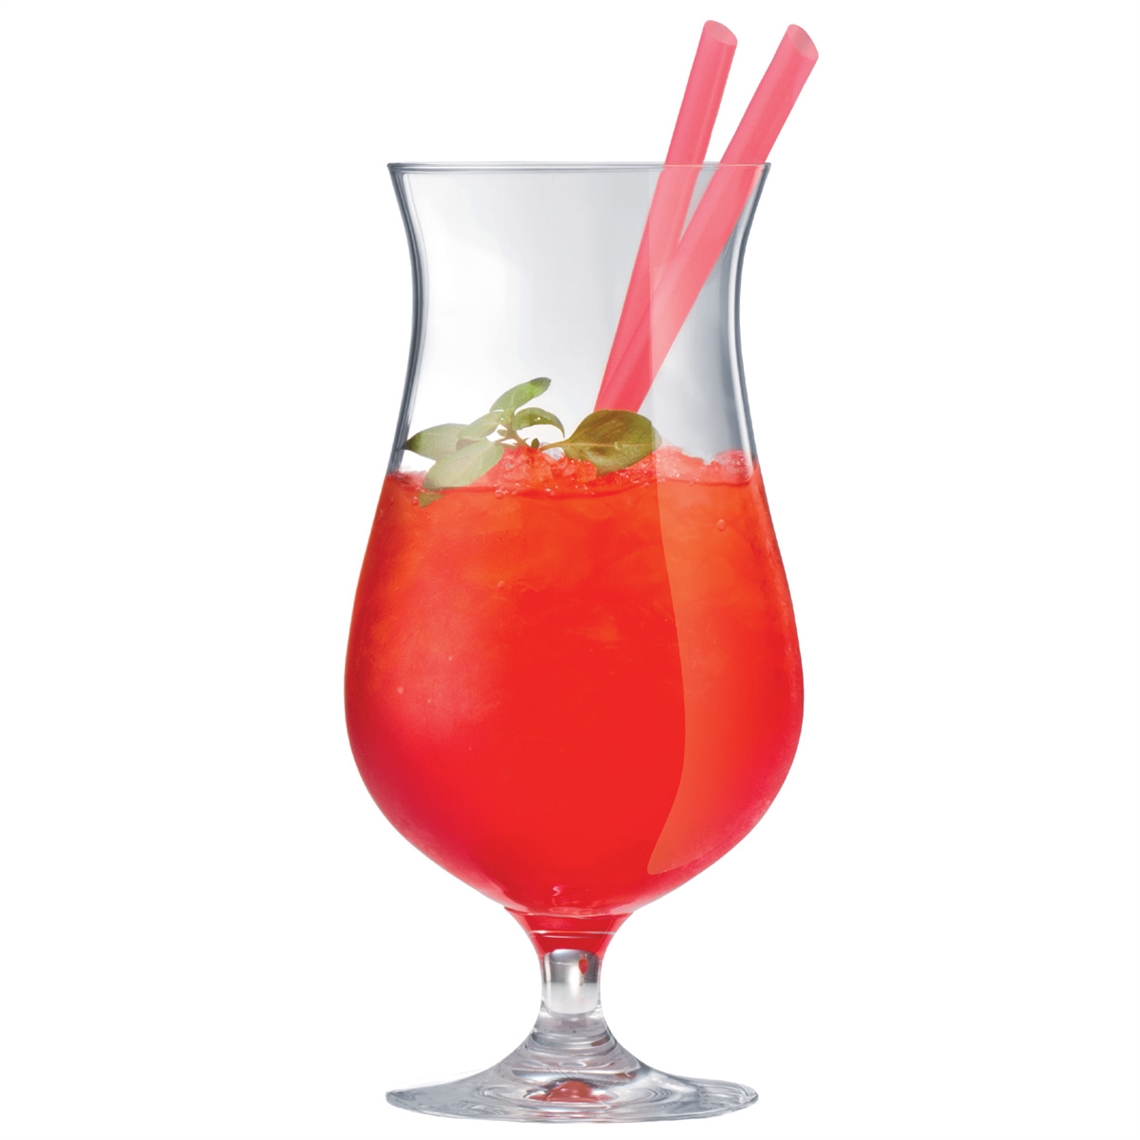 View more spirit glasses from our Cocktail Glasses range